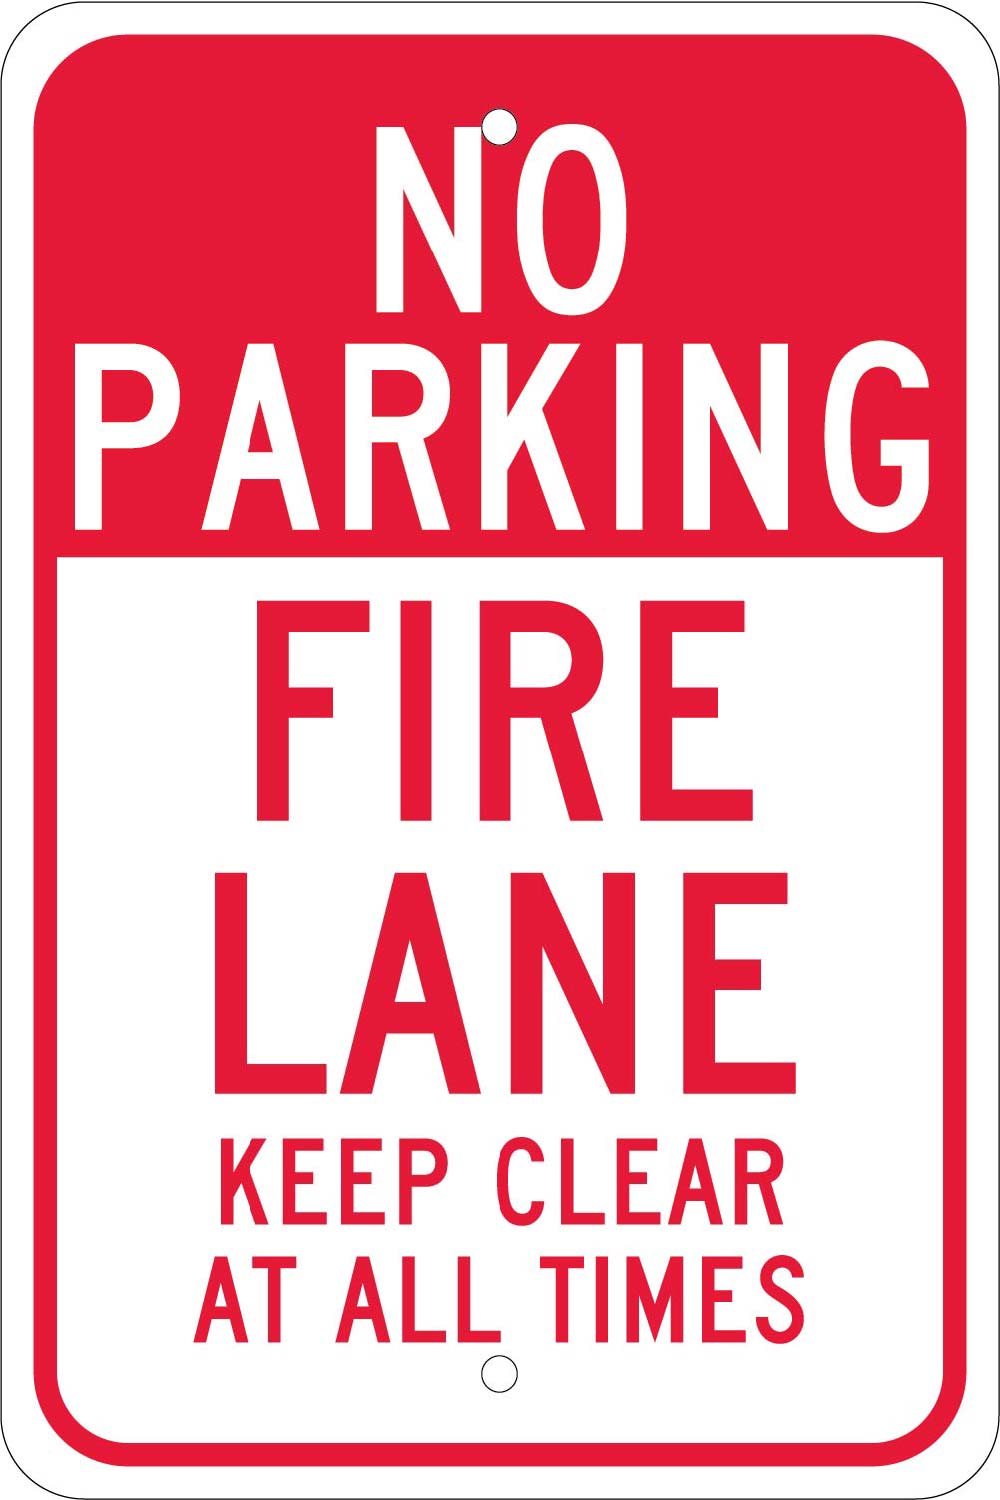 No Parking Fire Lane Keep Clear At All Times Sign-eSafety Supplies, Inc